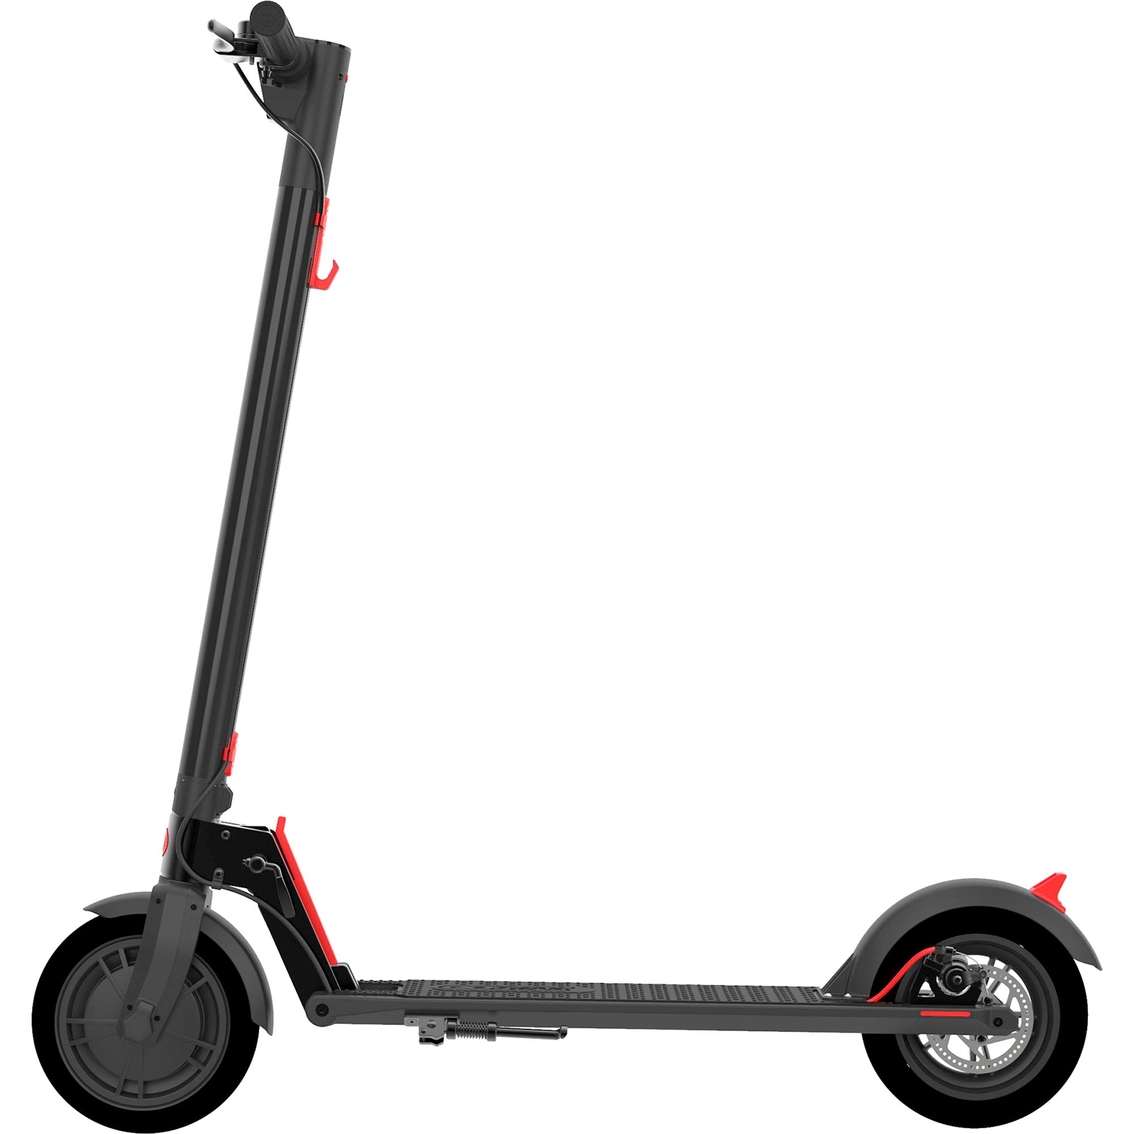 Go Trax GXL V2 Commuting Electric Scooter Hand Brake Edition